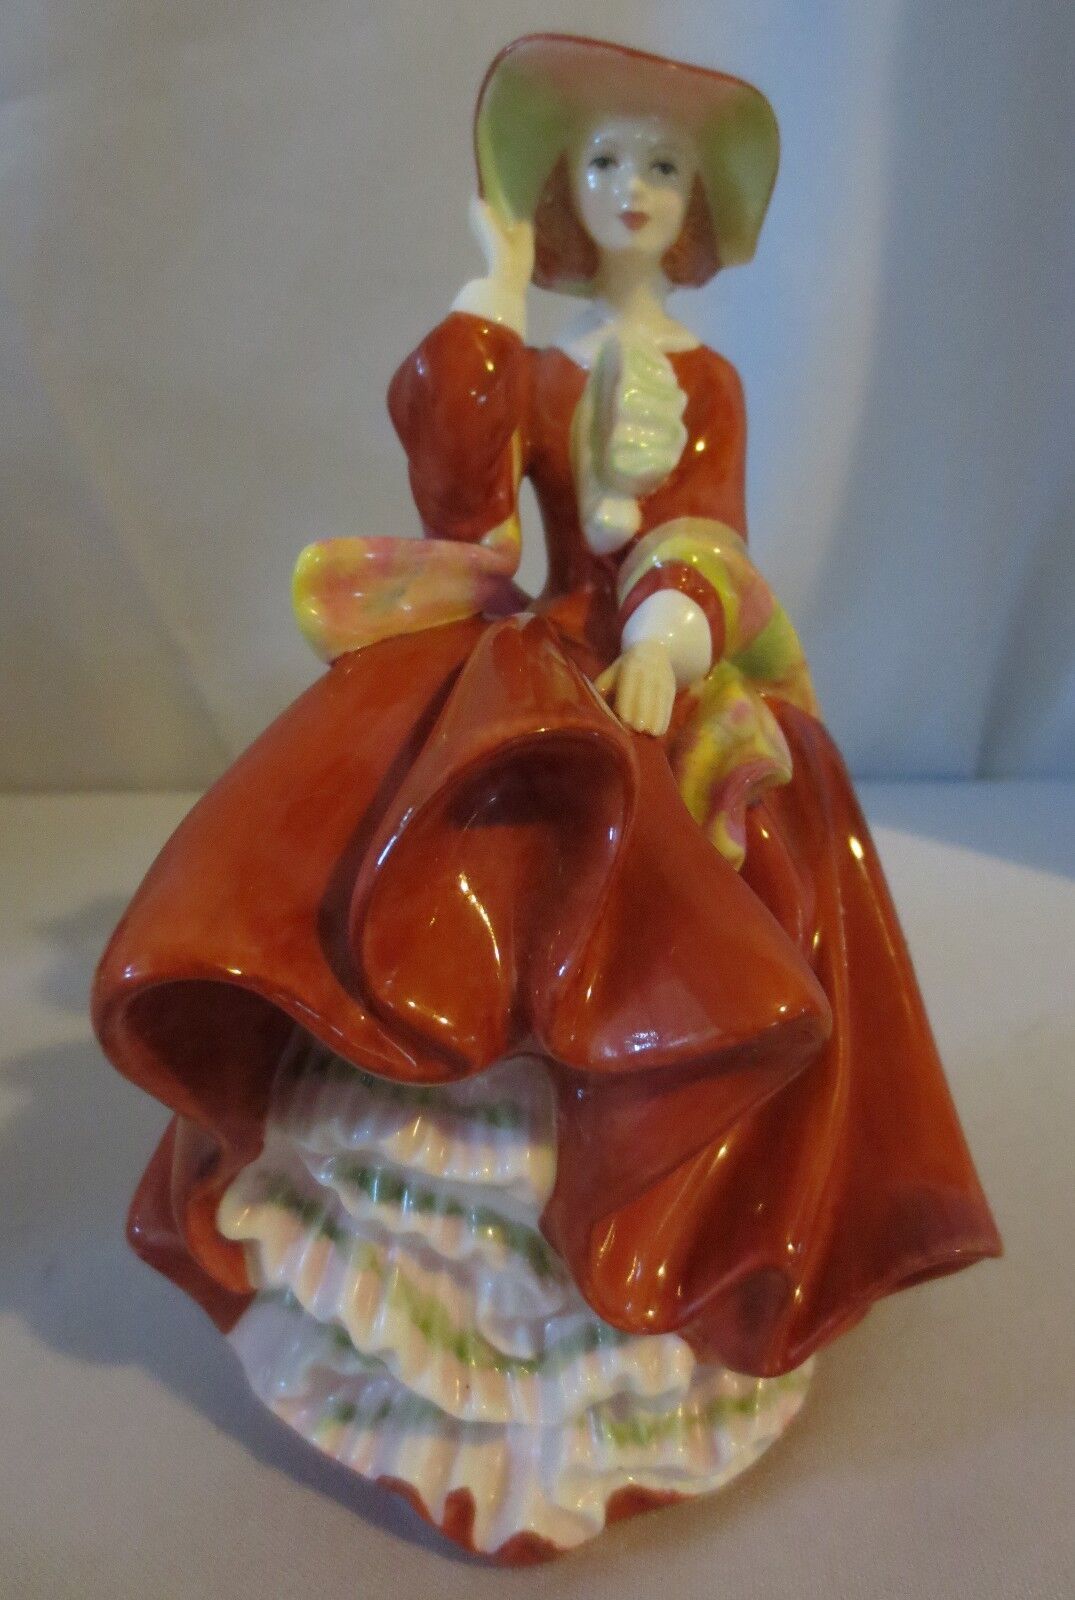 Royal Doulton  "Top O' The Hill" figure Modeled by Leslie Harredine 2004 - $60.00